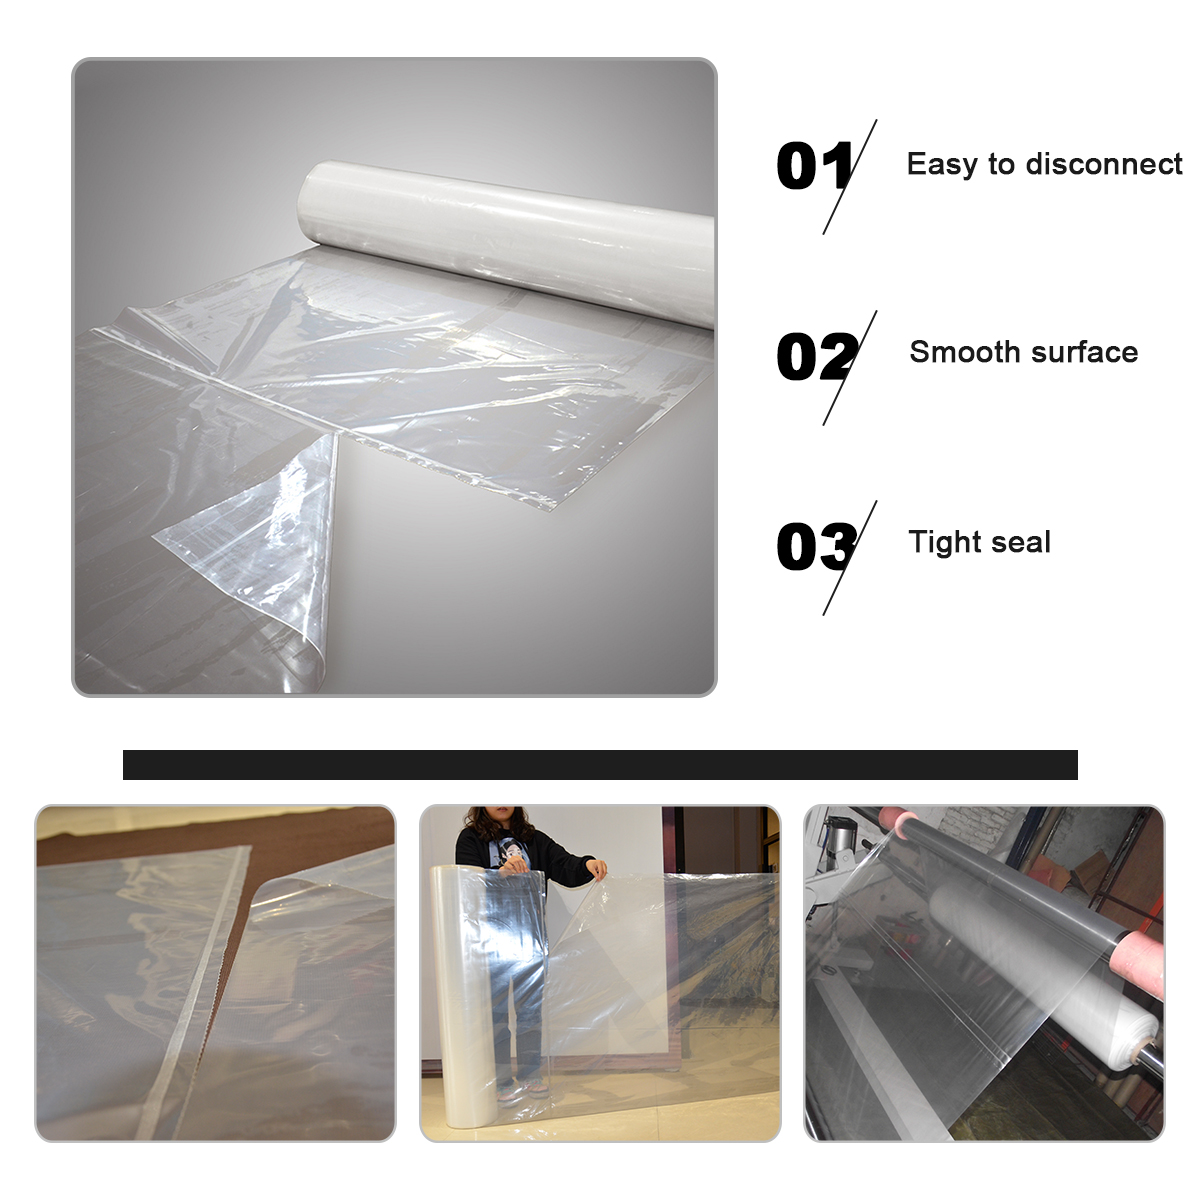 Large clear plastic bags